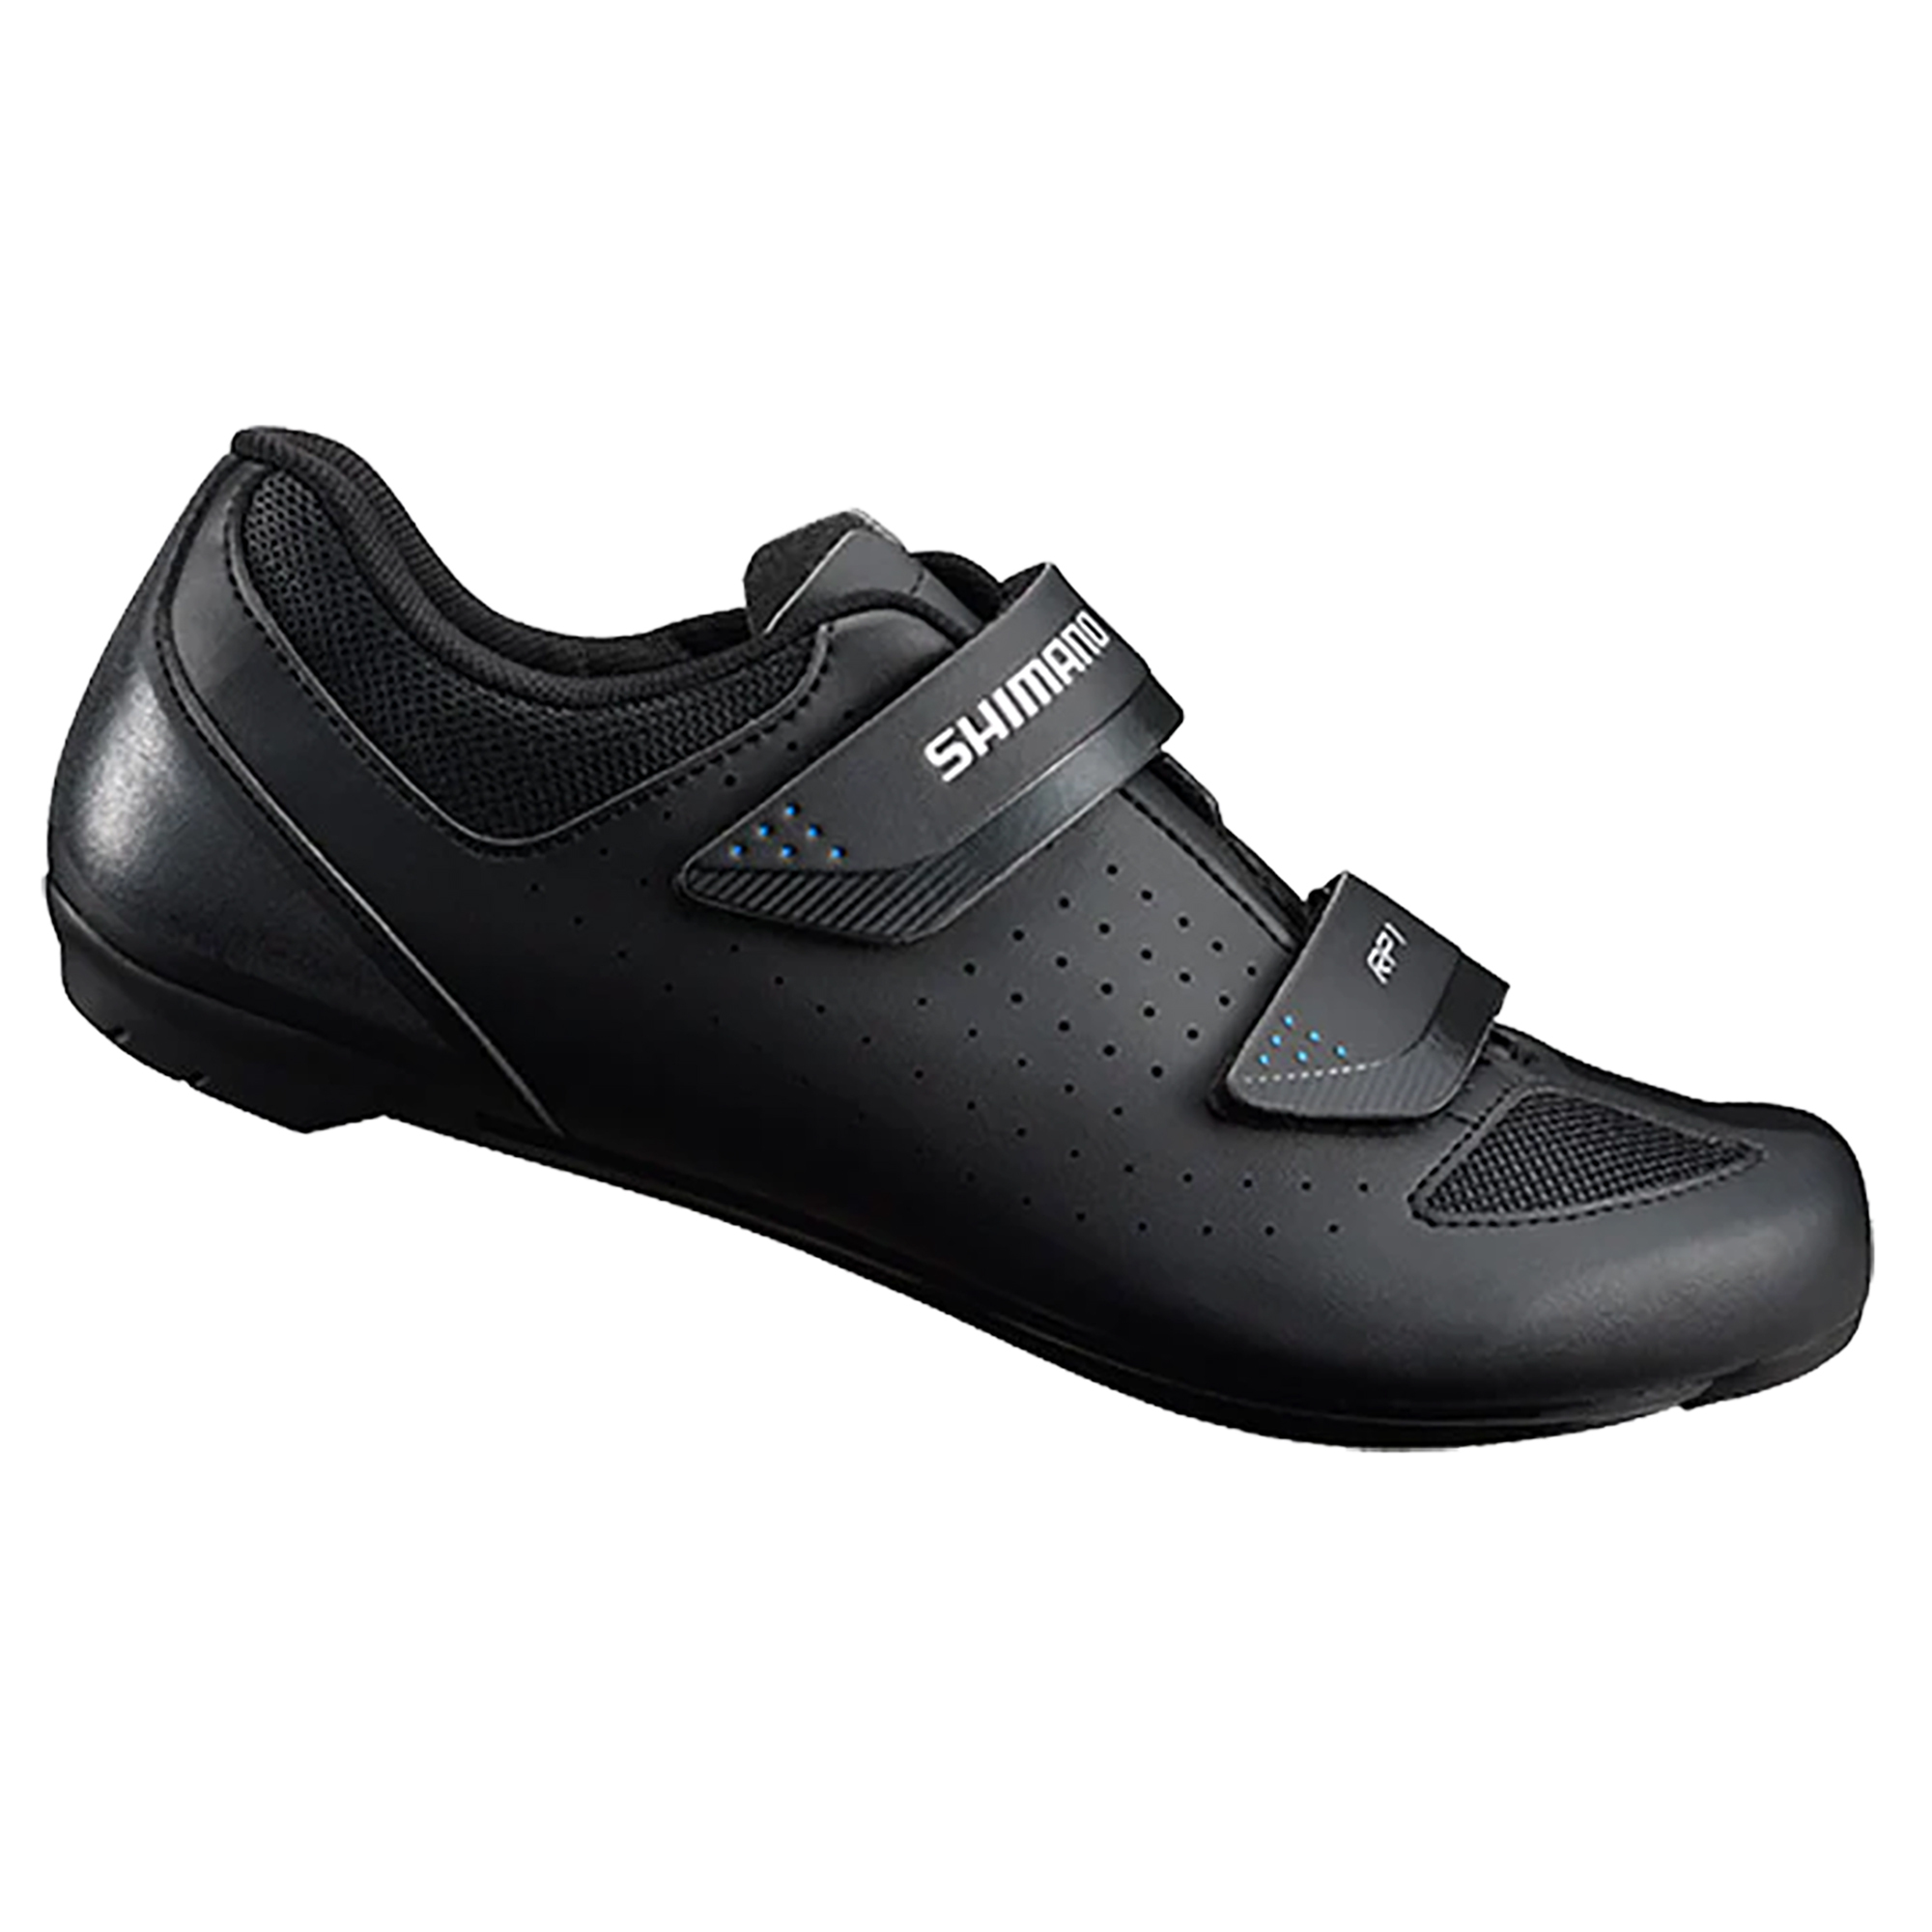 Shimano RP1 Road Bicycle Shoes For SPD SL Black Size 47